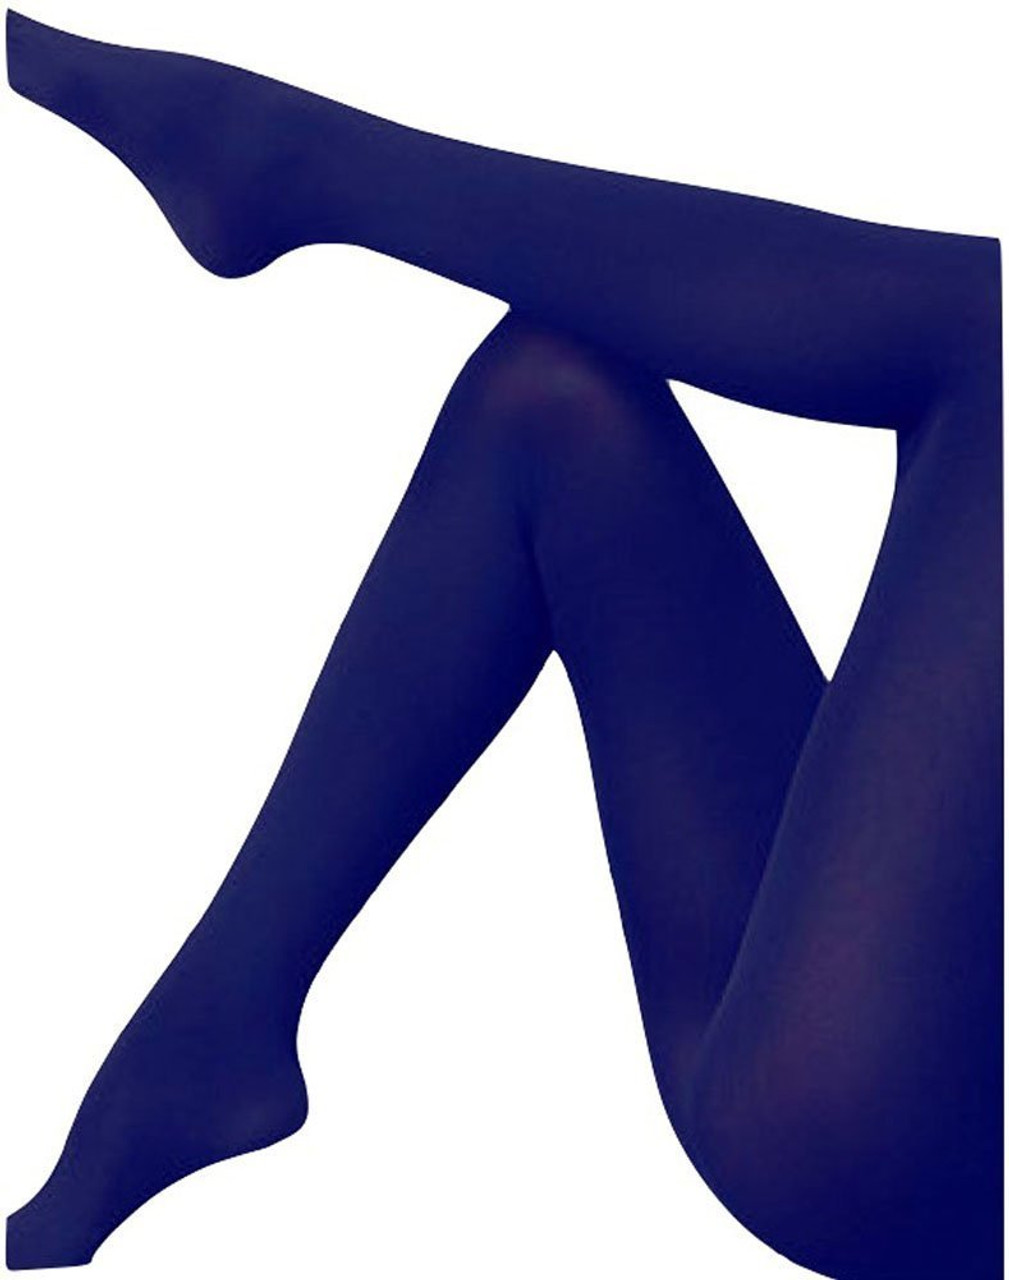 Super Control Top Navy Blue Opaque Pantyhose Tights 12 PACK